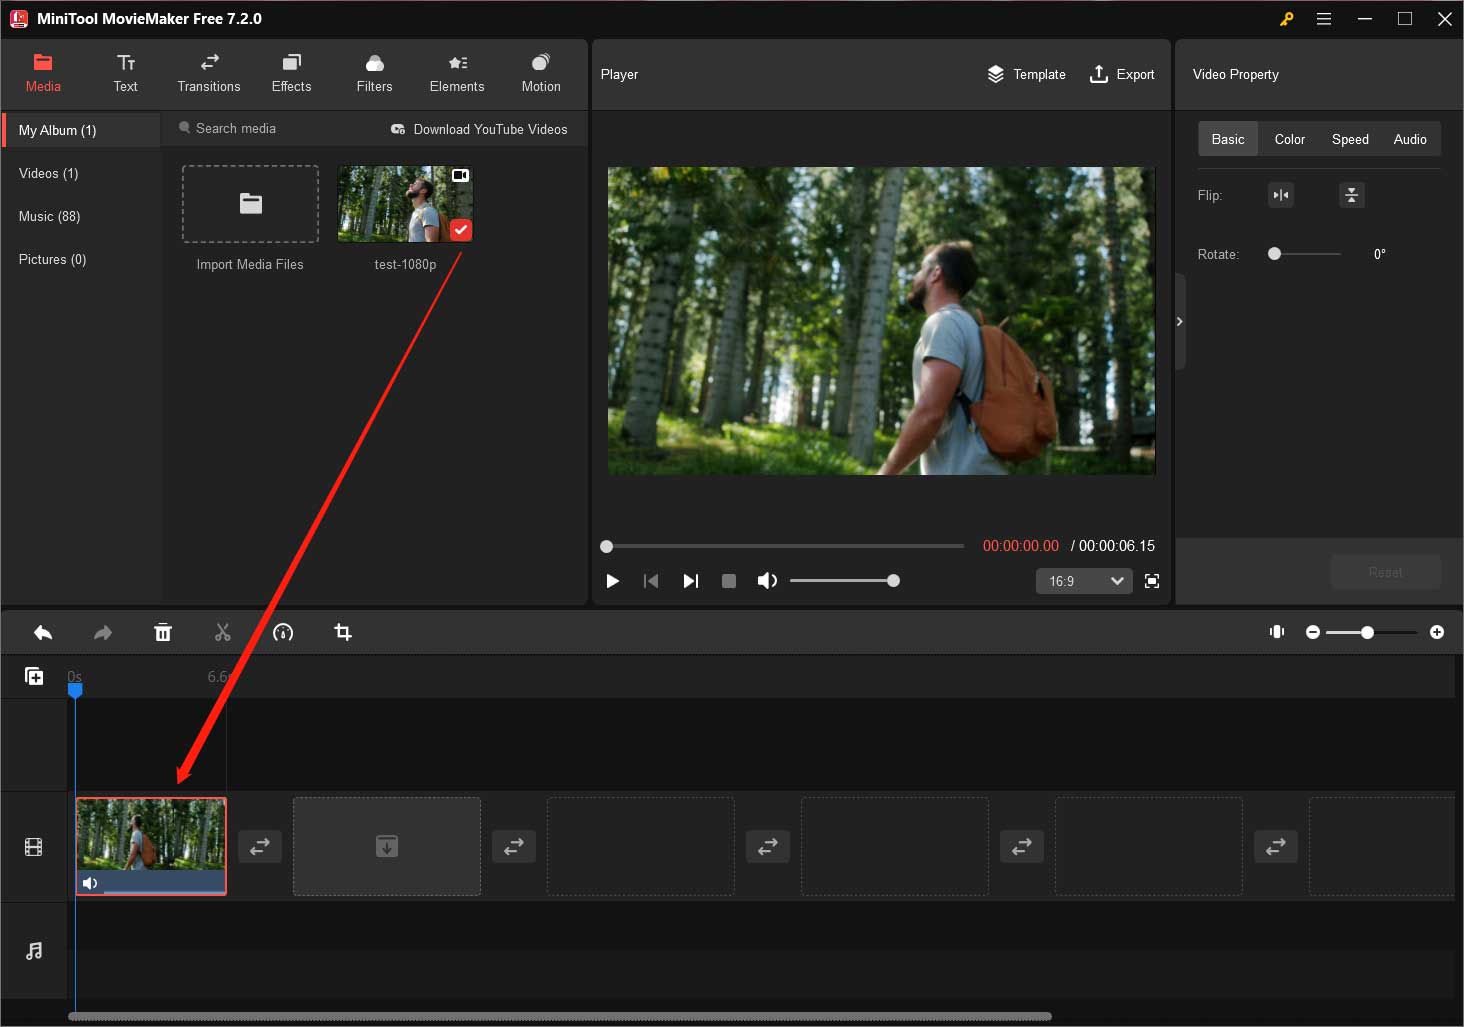 upload and add source video onto the timeline